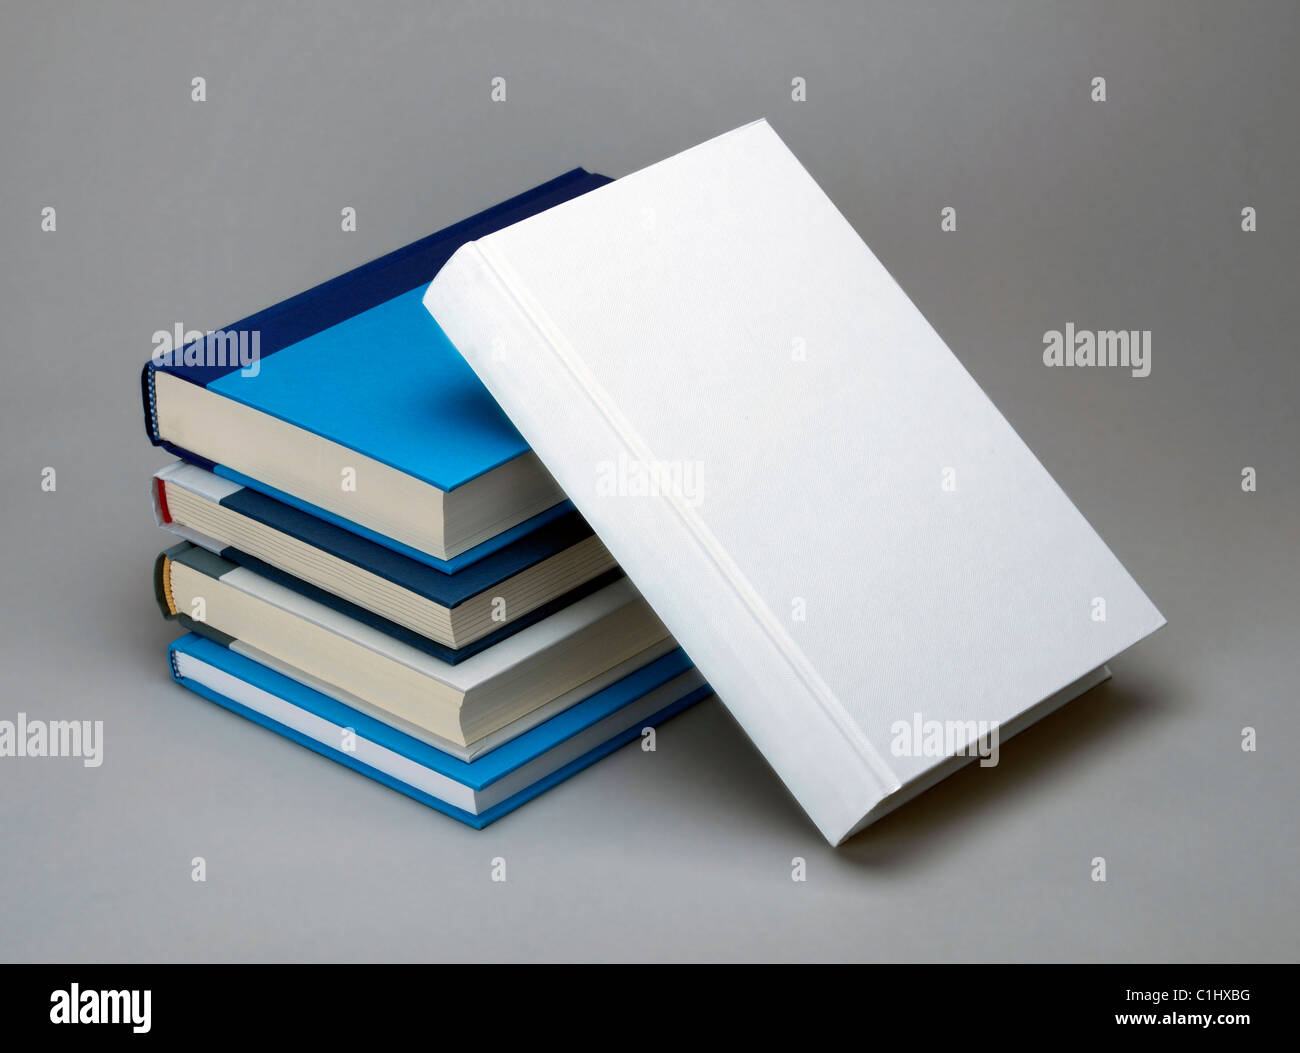 Plain white book and four colour books, for design layout Stock Photo